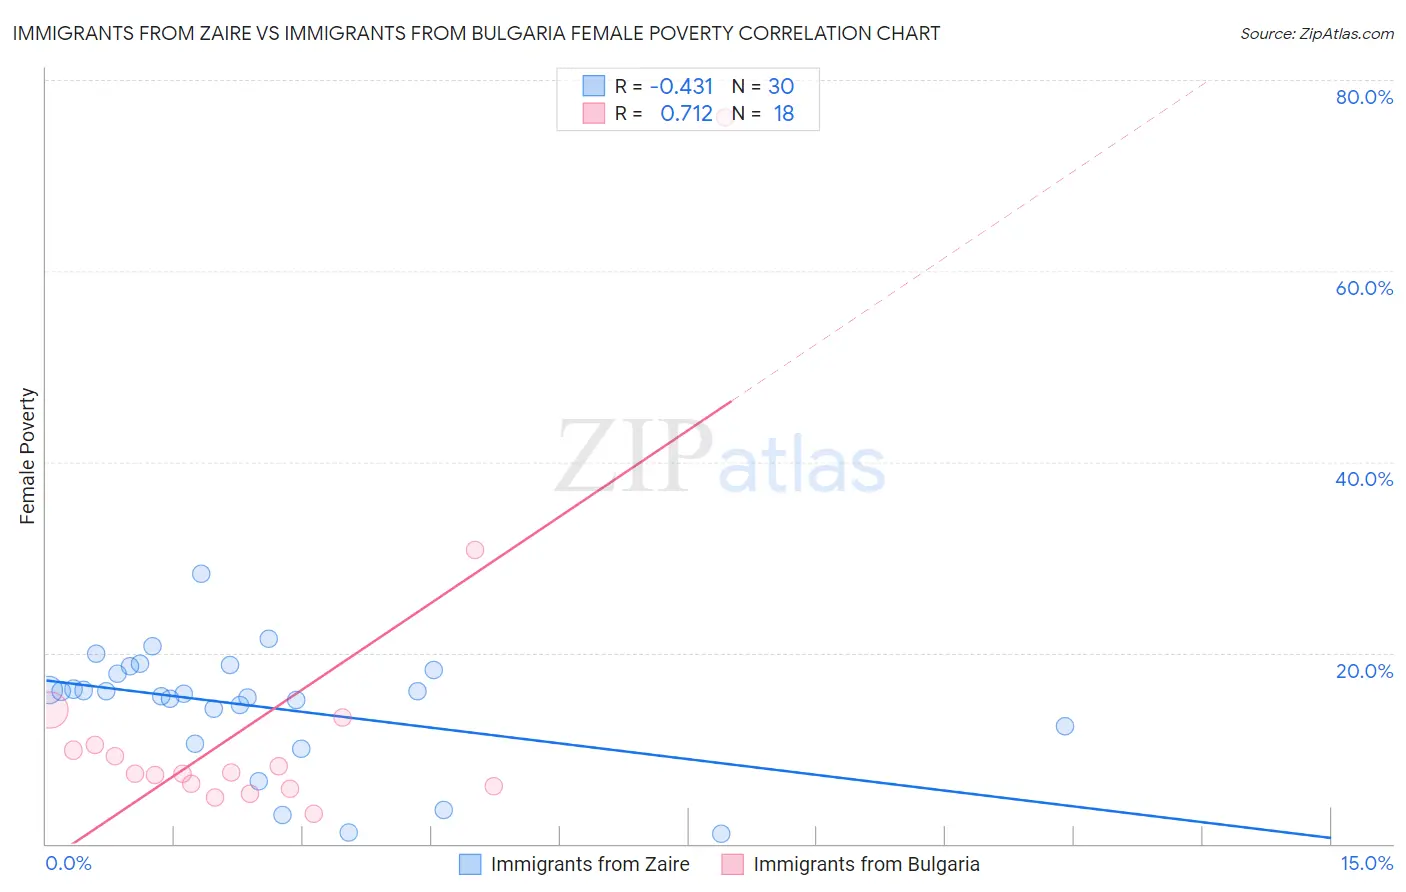 Immigrants from Zaire vs Immigrants from Bulgaria Female Poverty